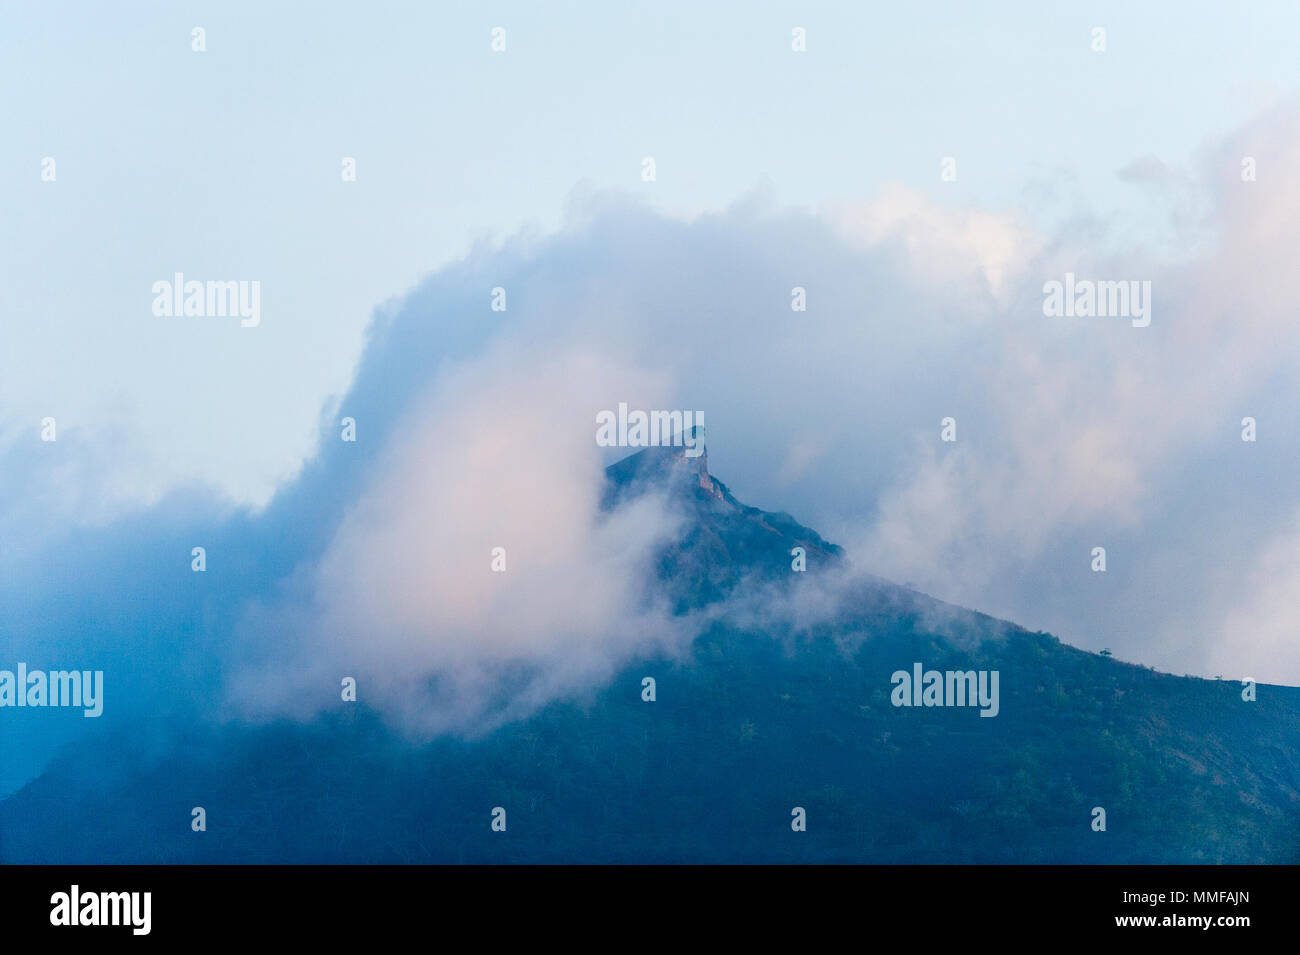 Mist shrouds the jagged summit of a tropical island covered in rainforest. Stock Photo